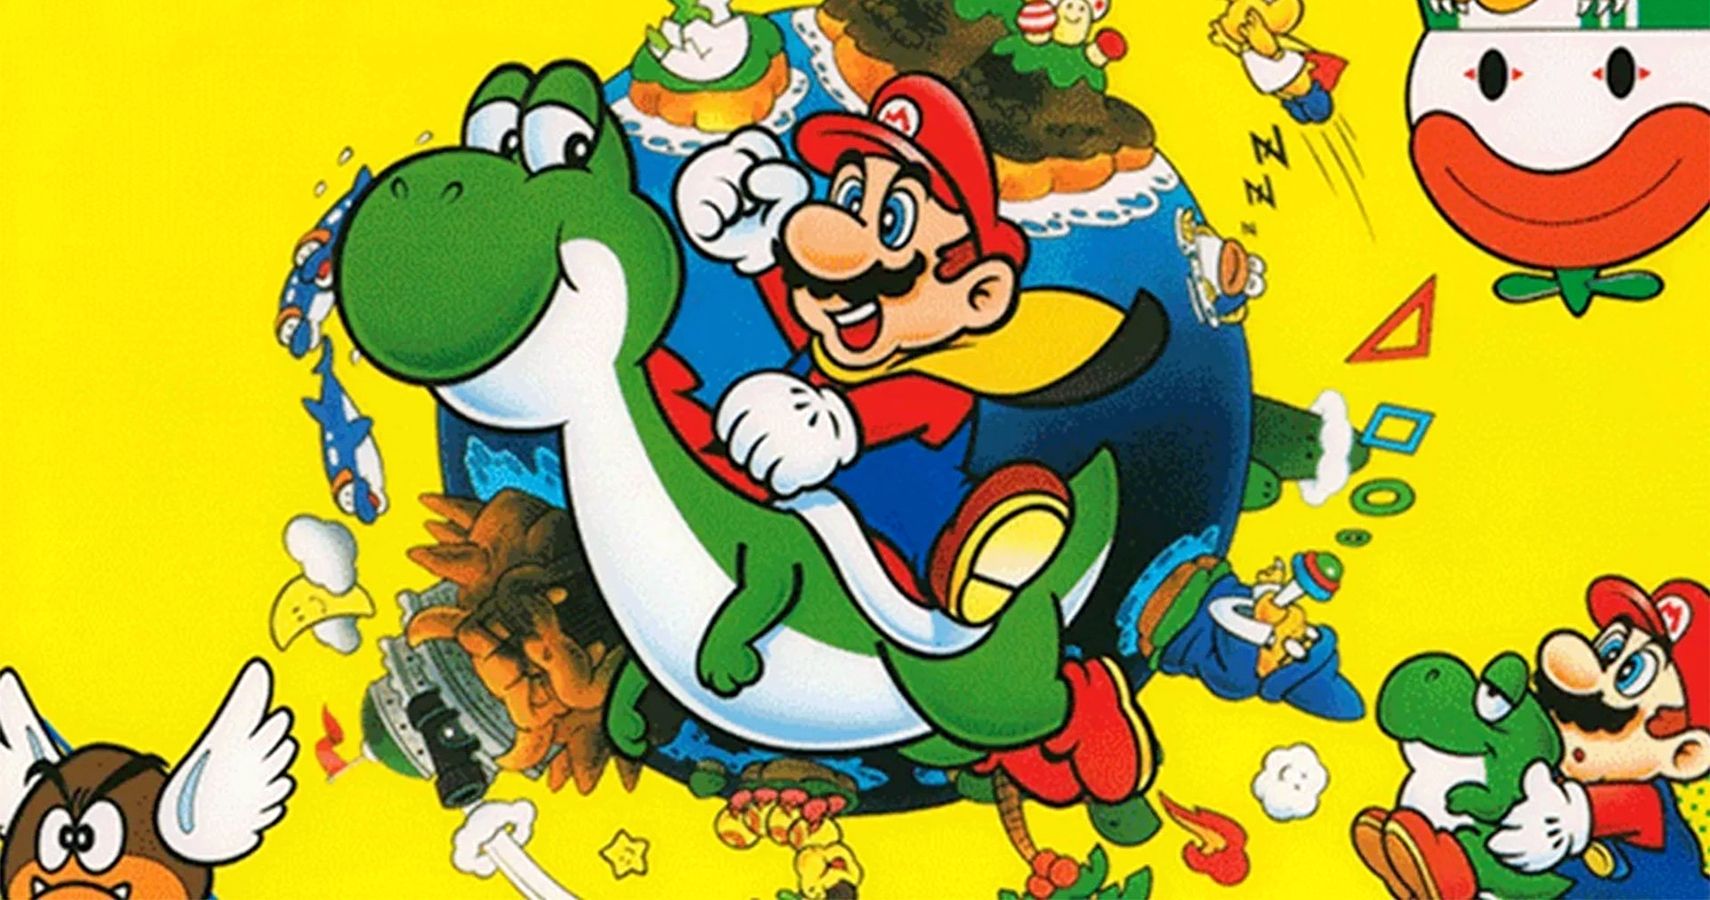 super-mario-world-soundtrack-gets-fan-remaster-totally-worth-a-listen-philippines-new-hope